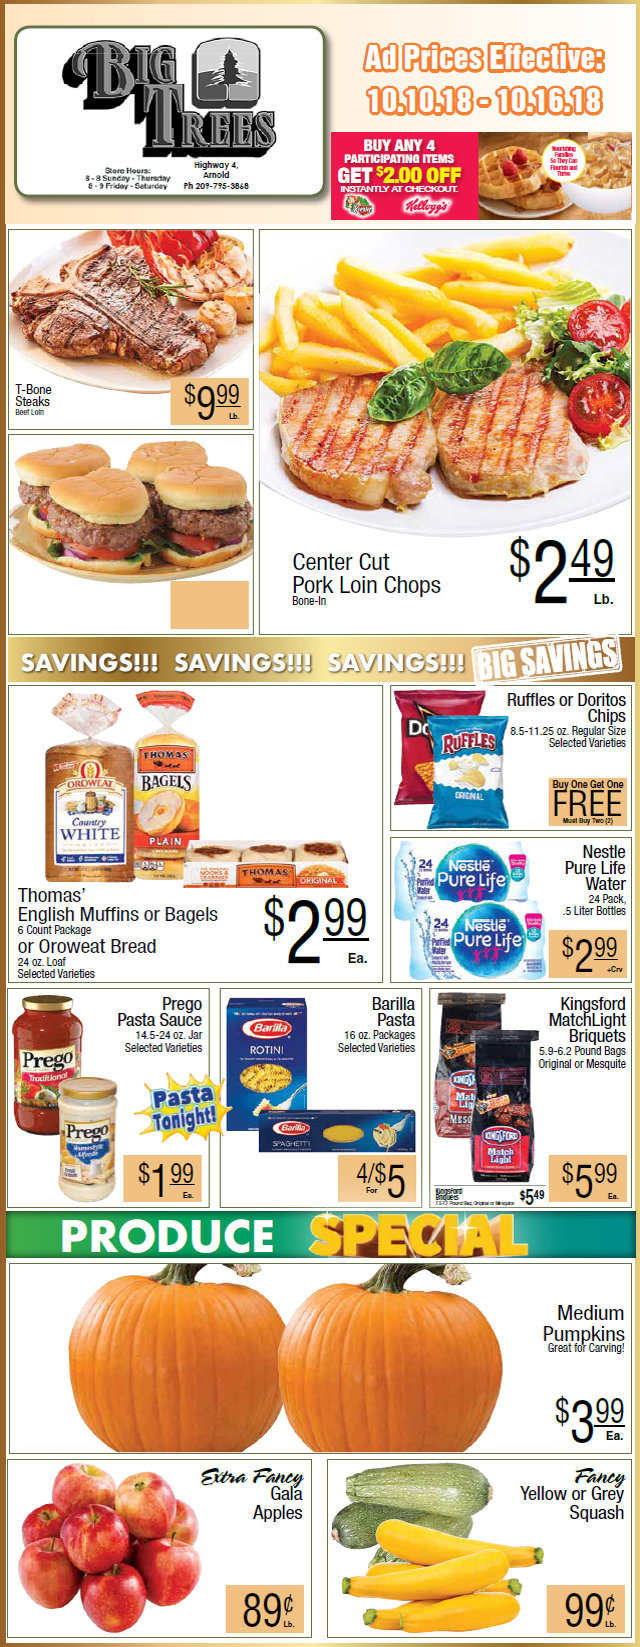 Big Trees Market Weekly Ad & Grocery Specials Through October 16th